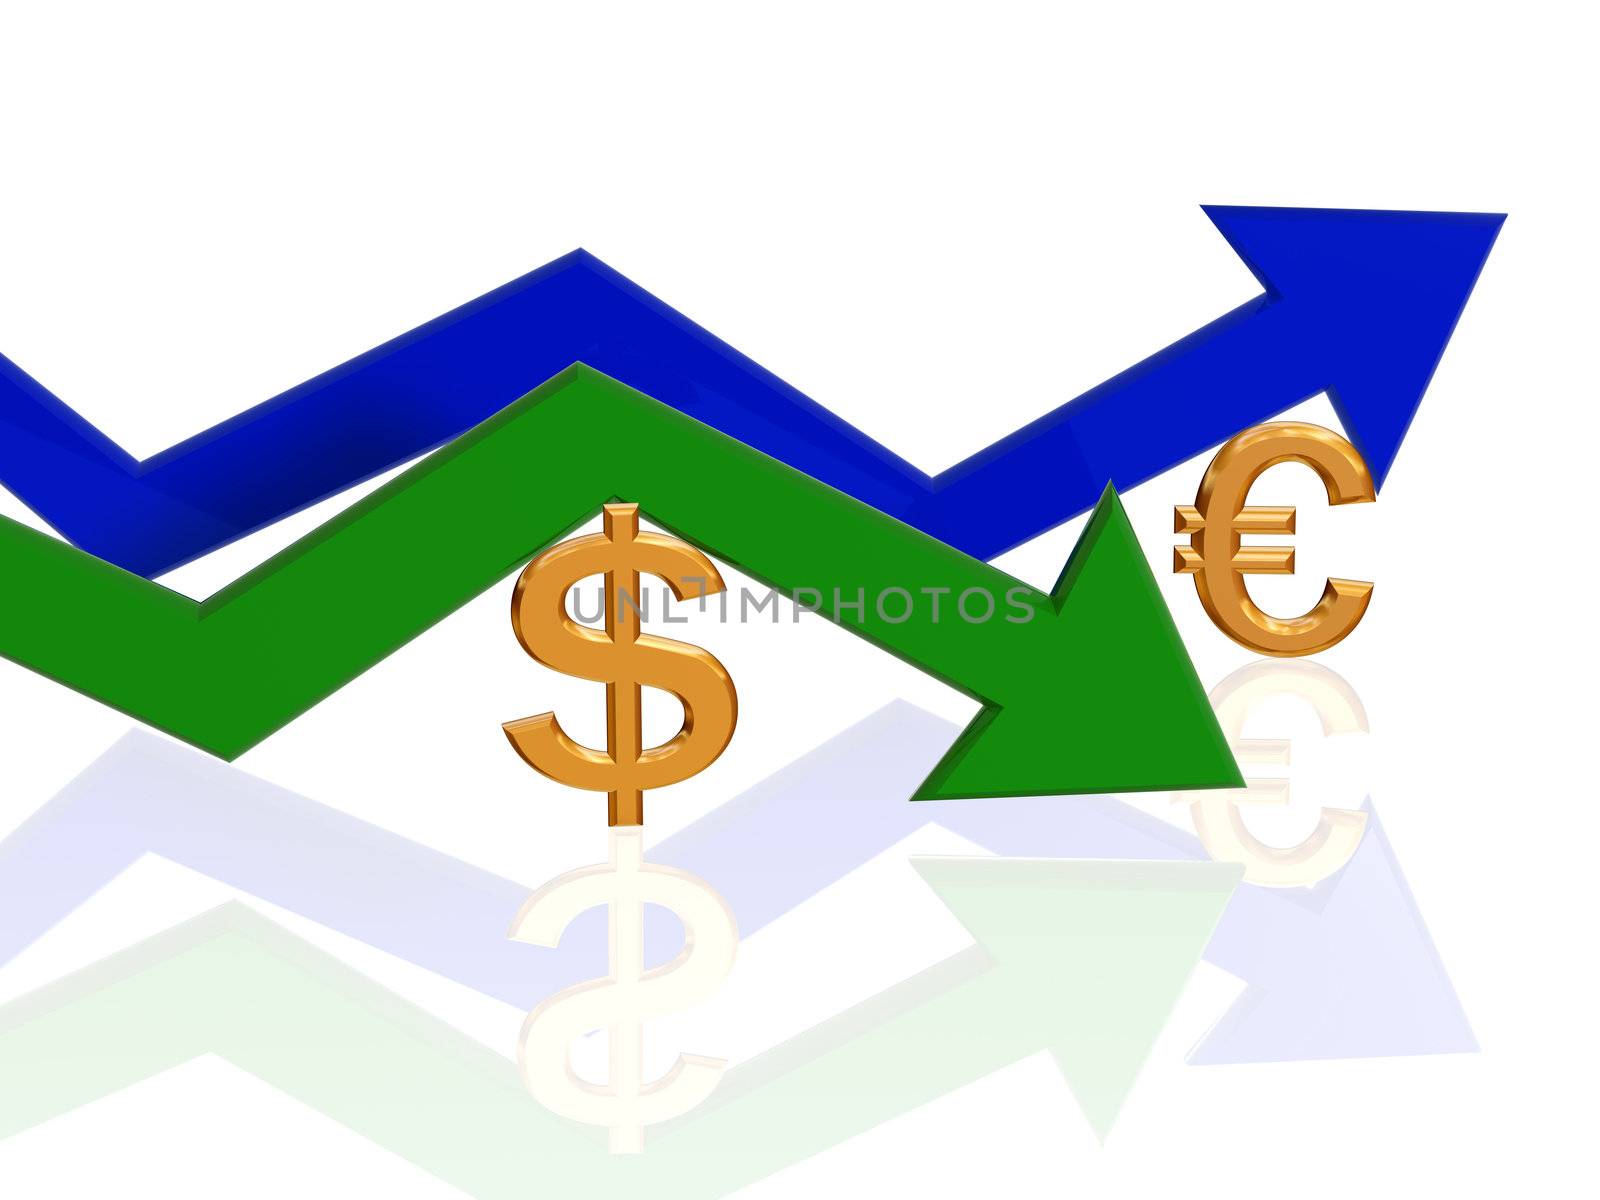 3d golden dollar and euro signs with green and blue arrows